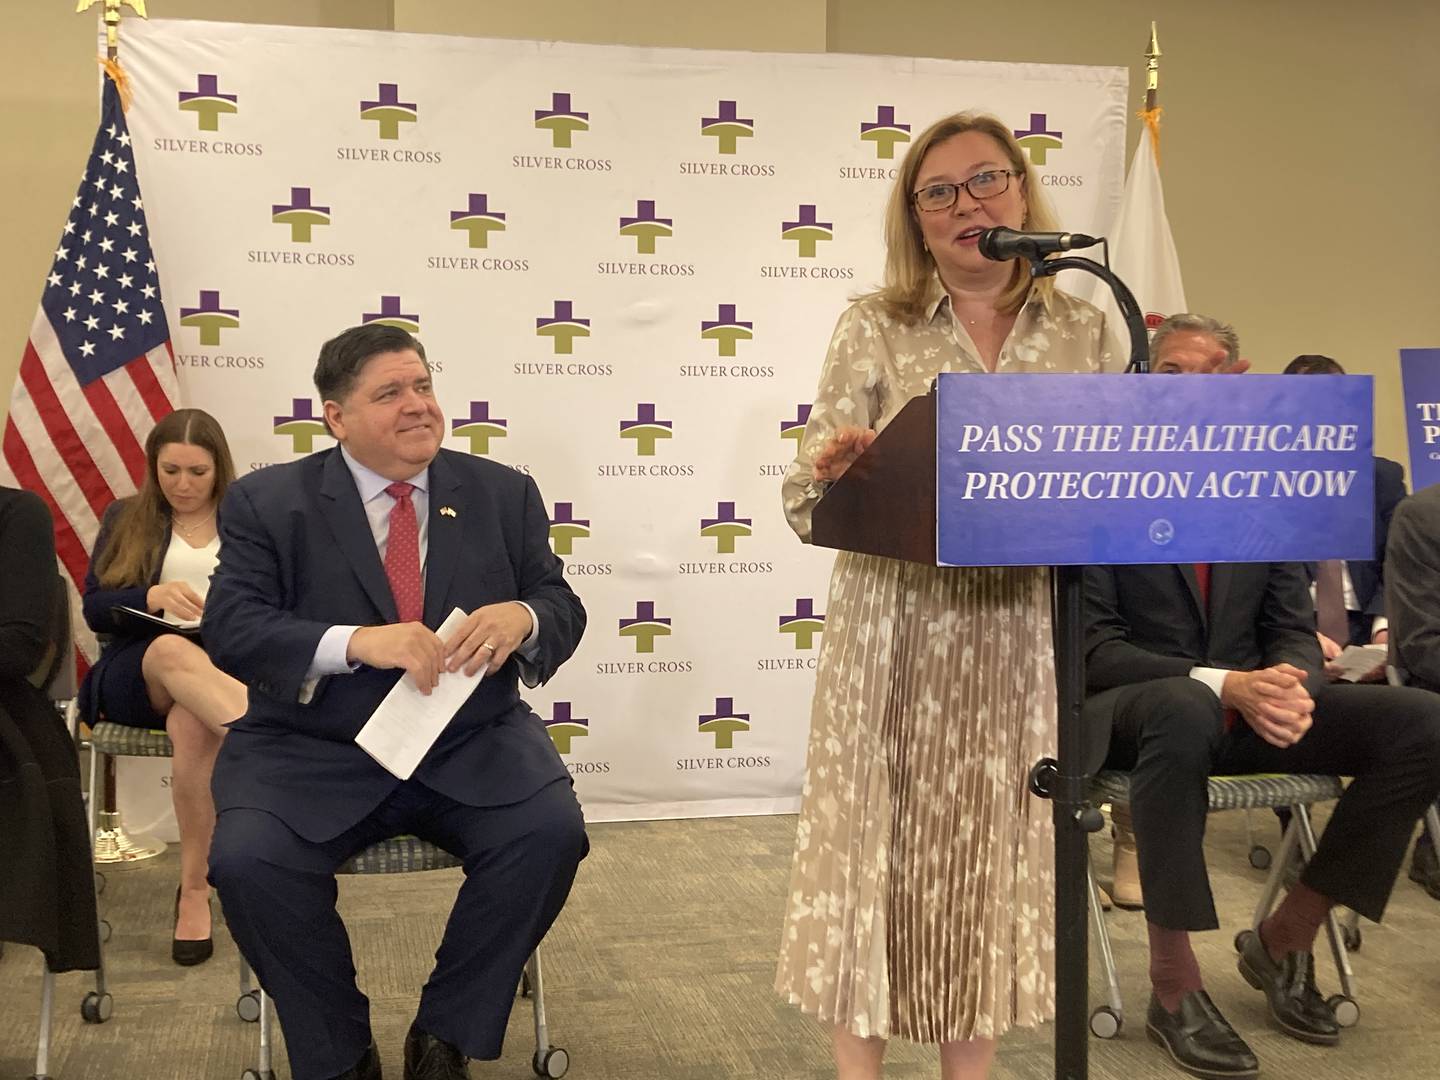 State Rep. Anna Moeller discusses the Healthcare Protection Act at a press conference with Gov. JB Pritzker at Silver Cross Hospital.